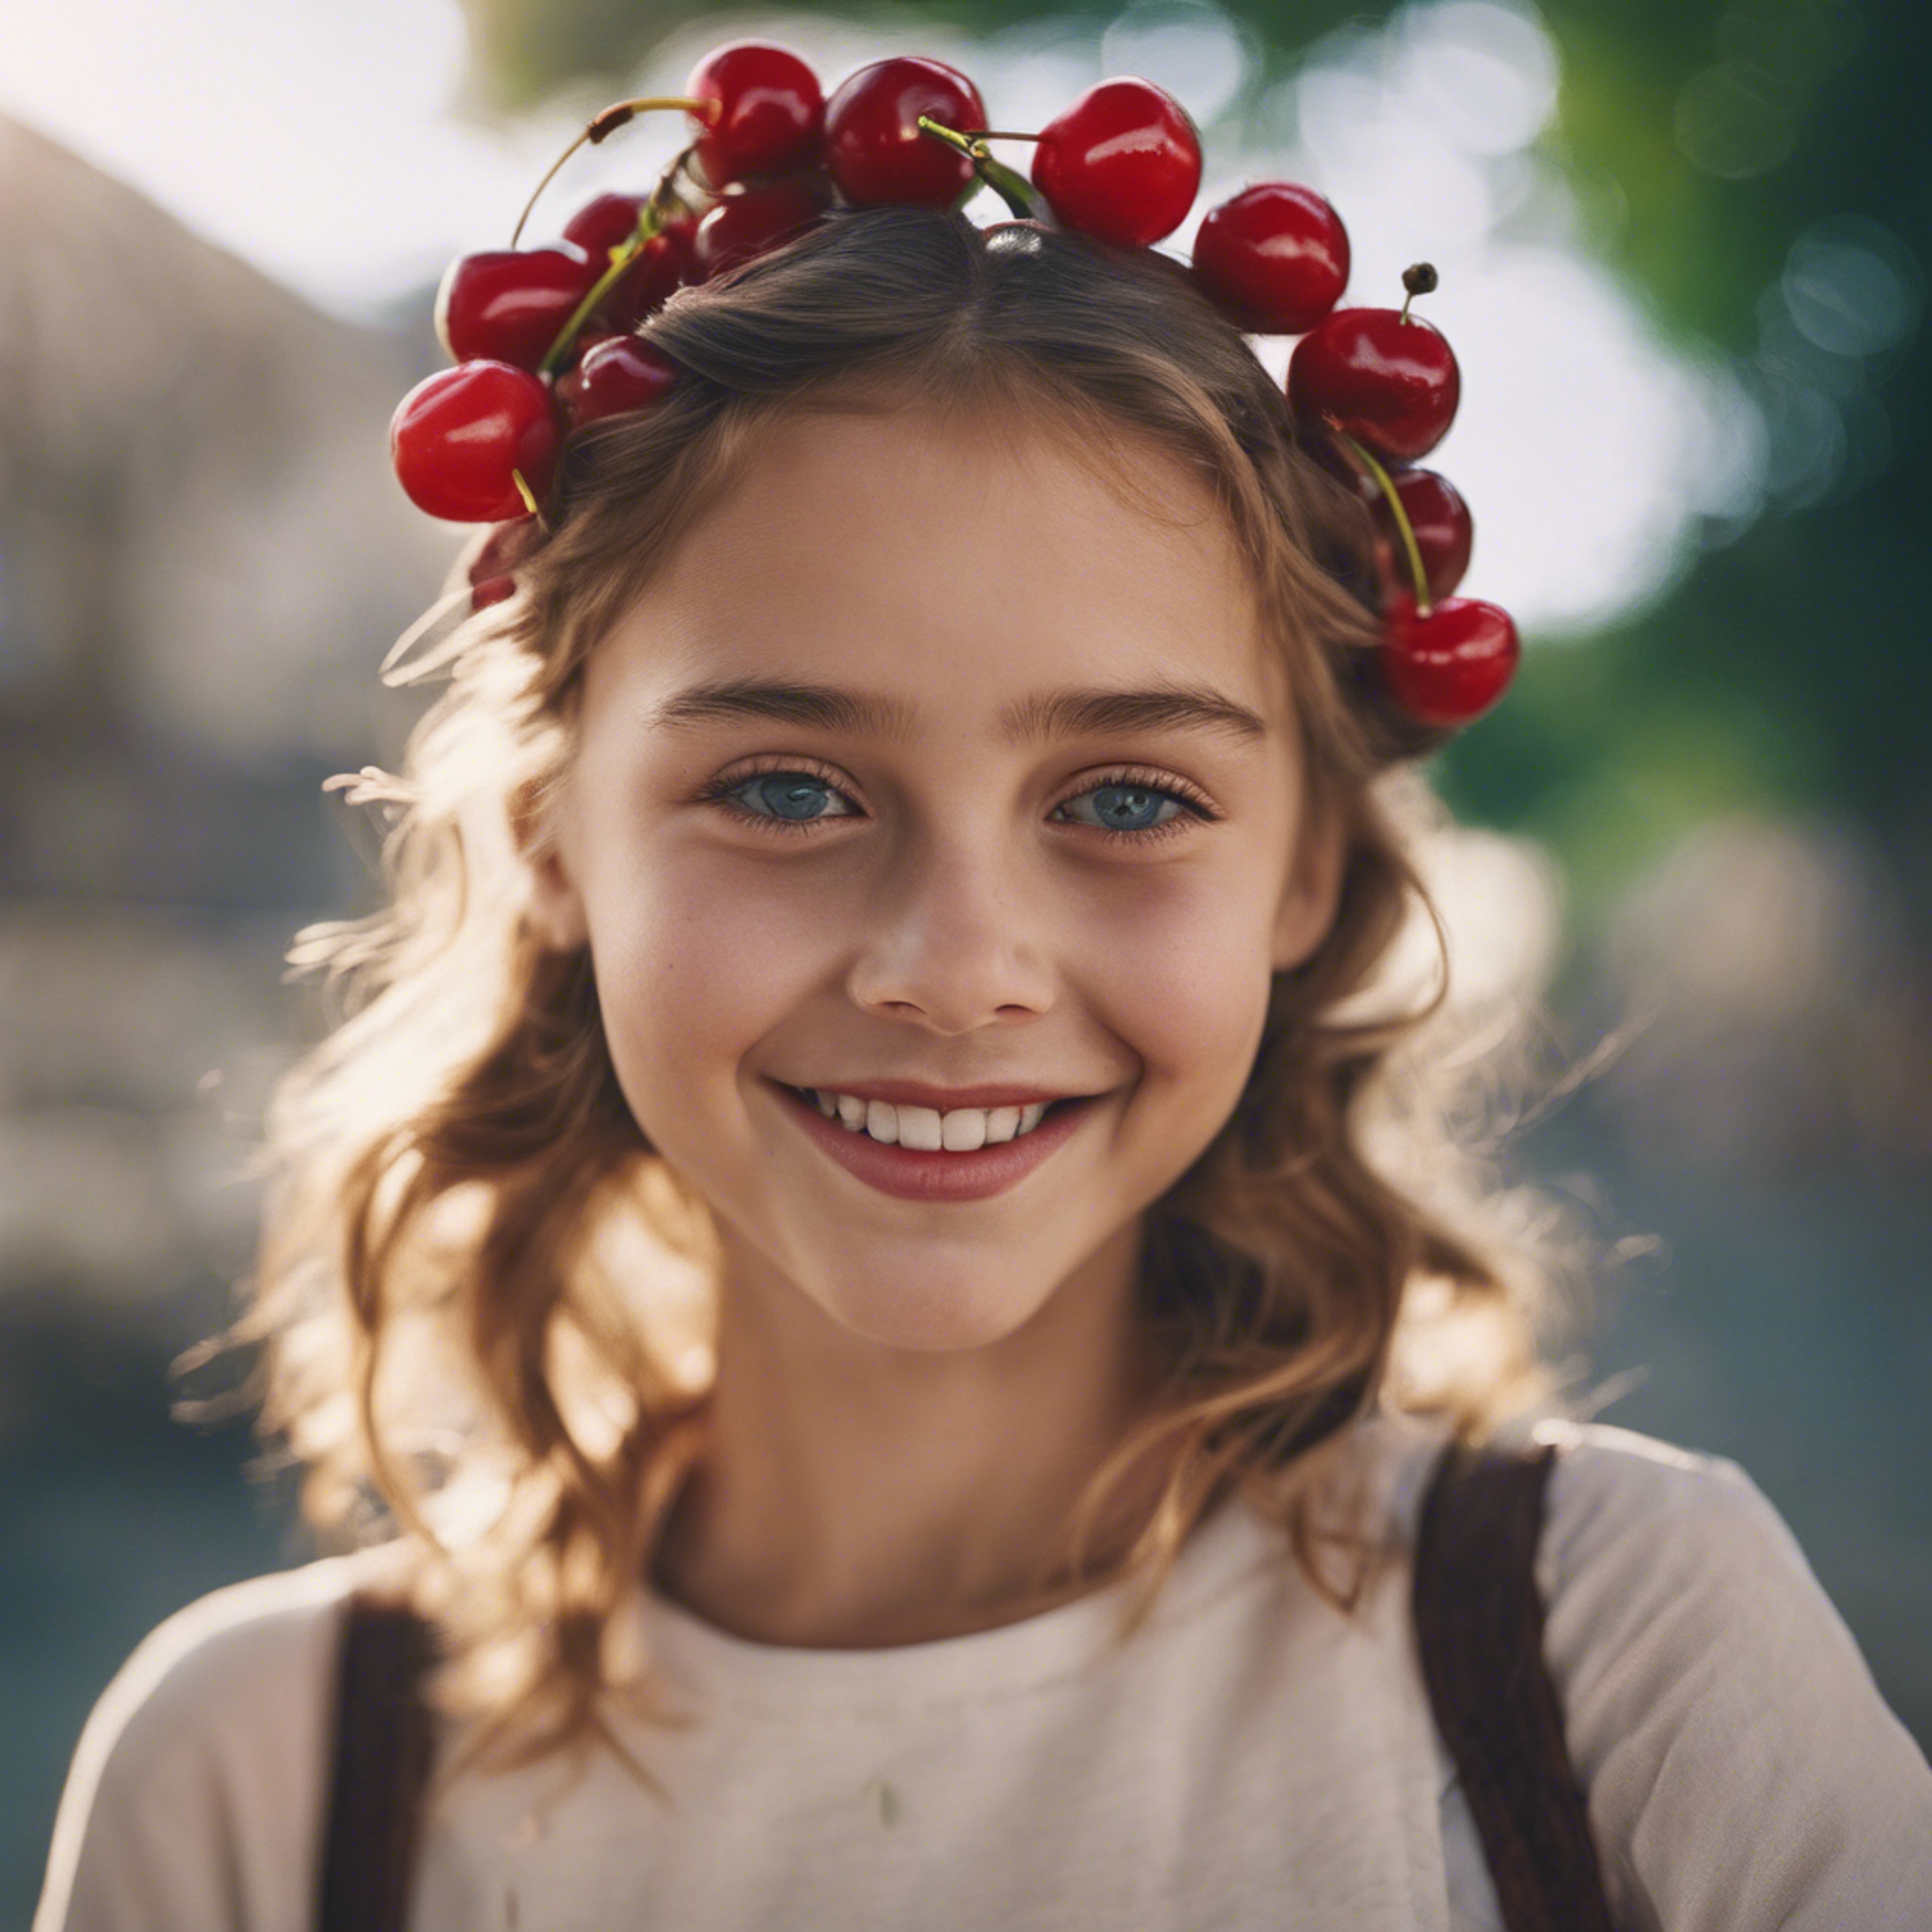 A girl with a cherry barrette in her hair, smiling at the viewer. Hintergrund[3ffde2b89a9346a6b02b]